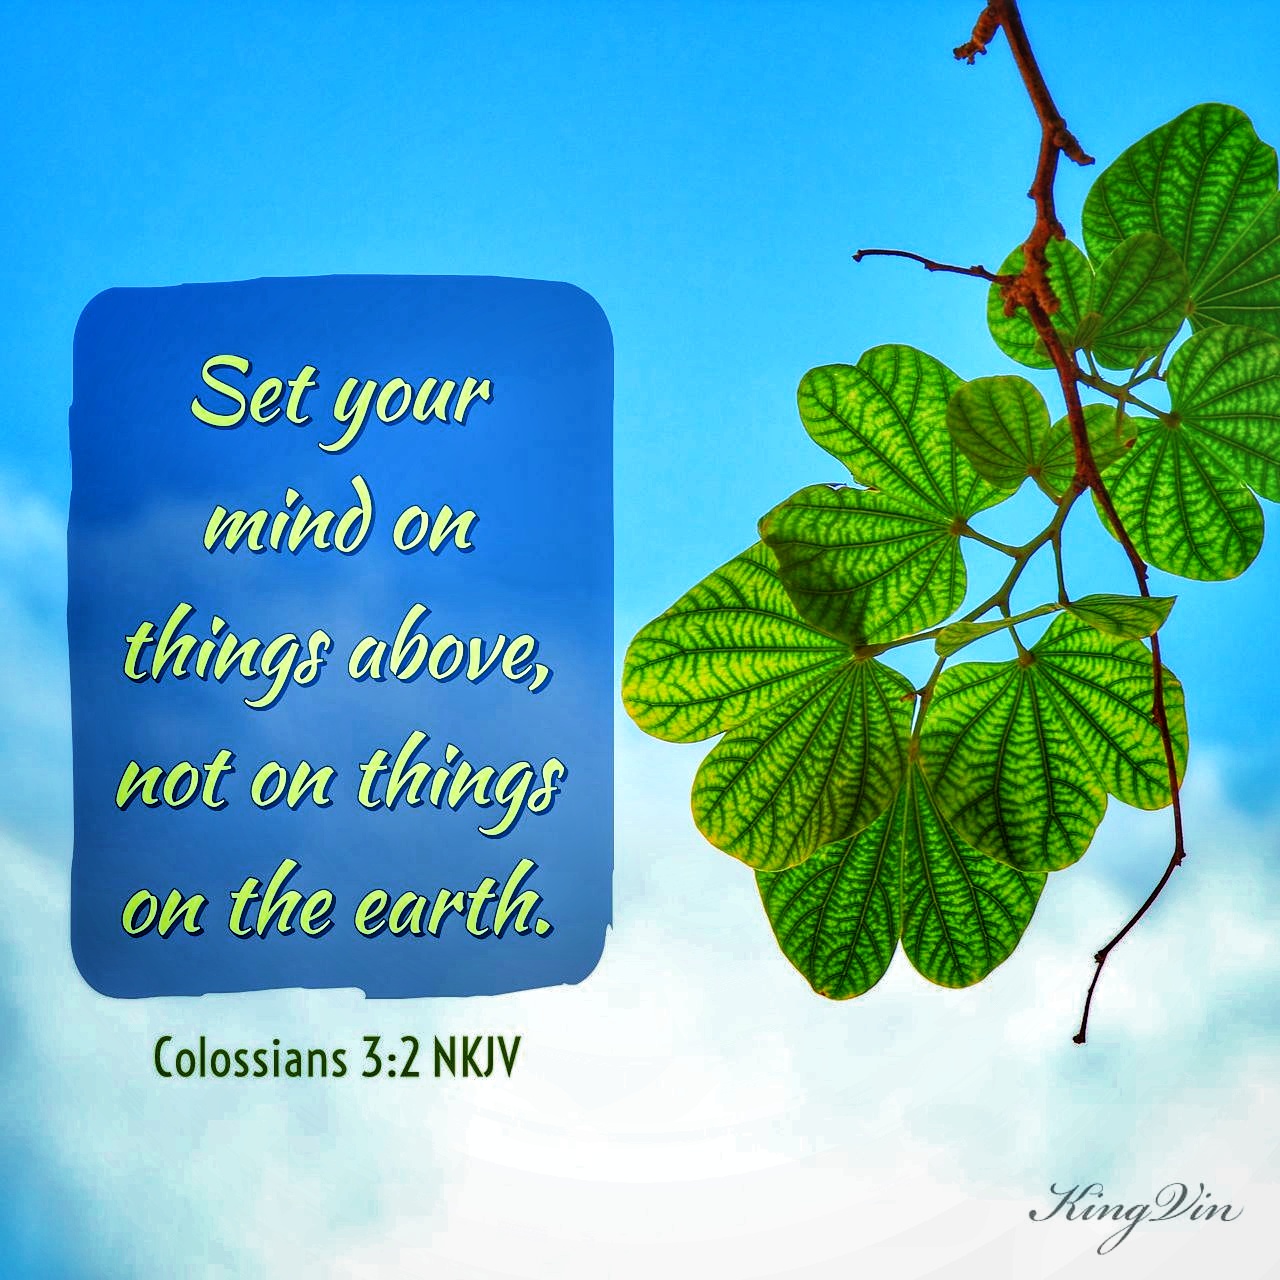 Set your mind on things above, not on things on the earth. Colossians 3:2 NKJV